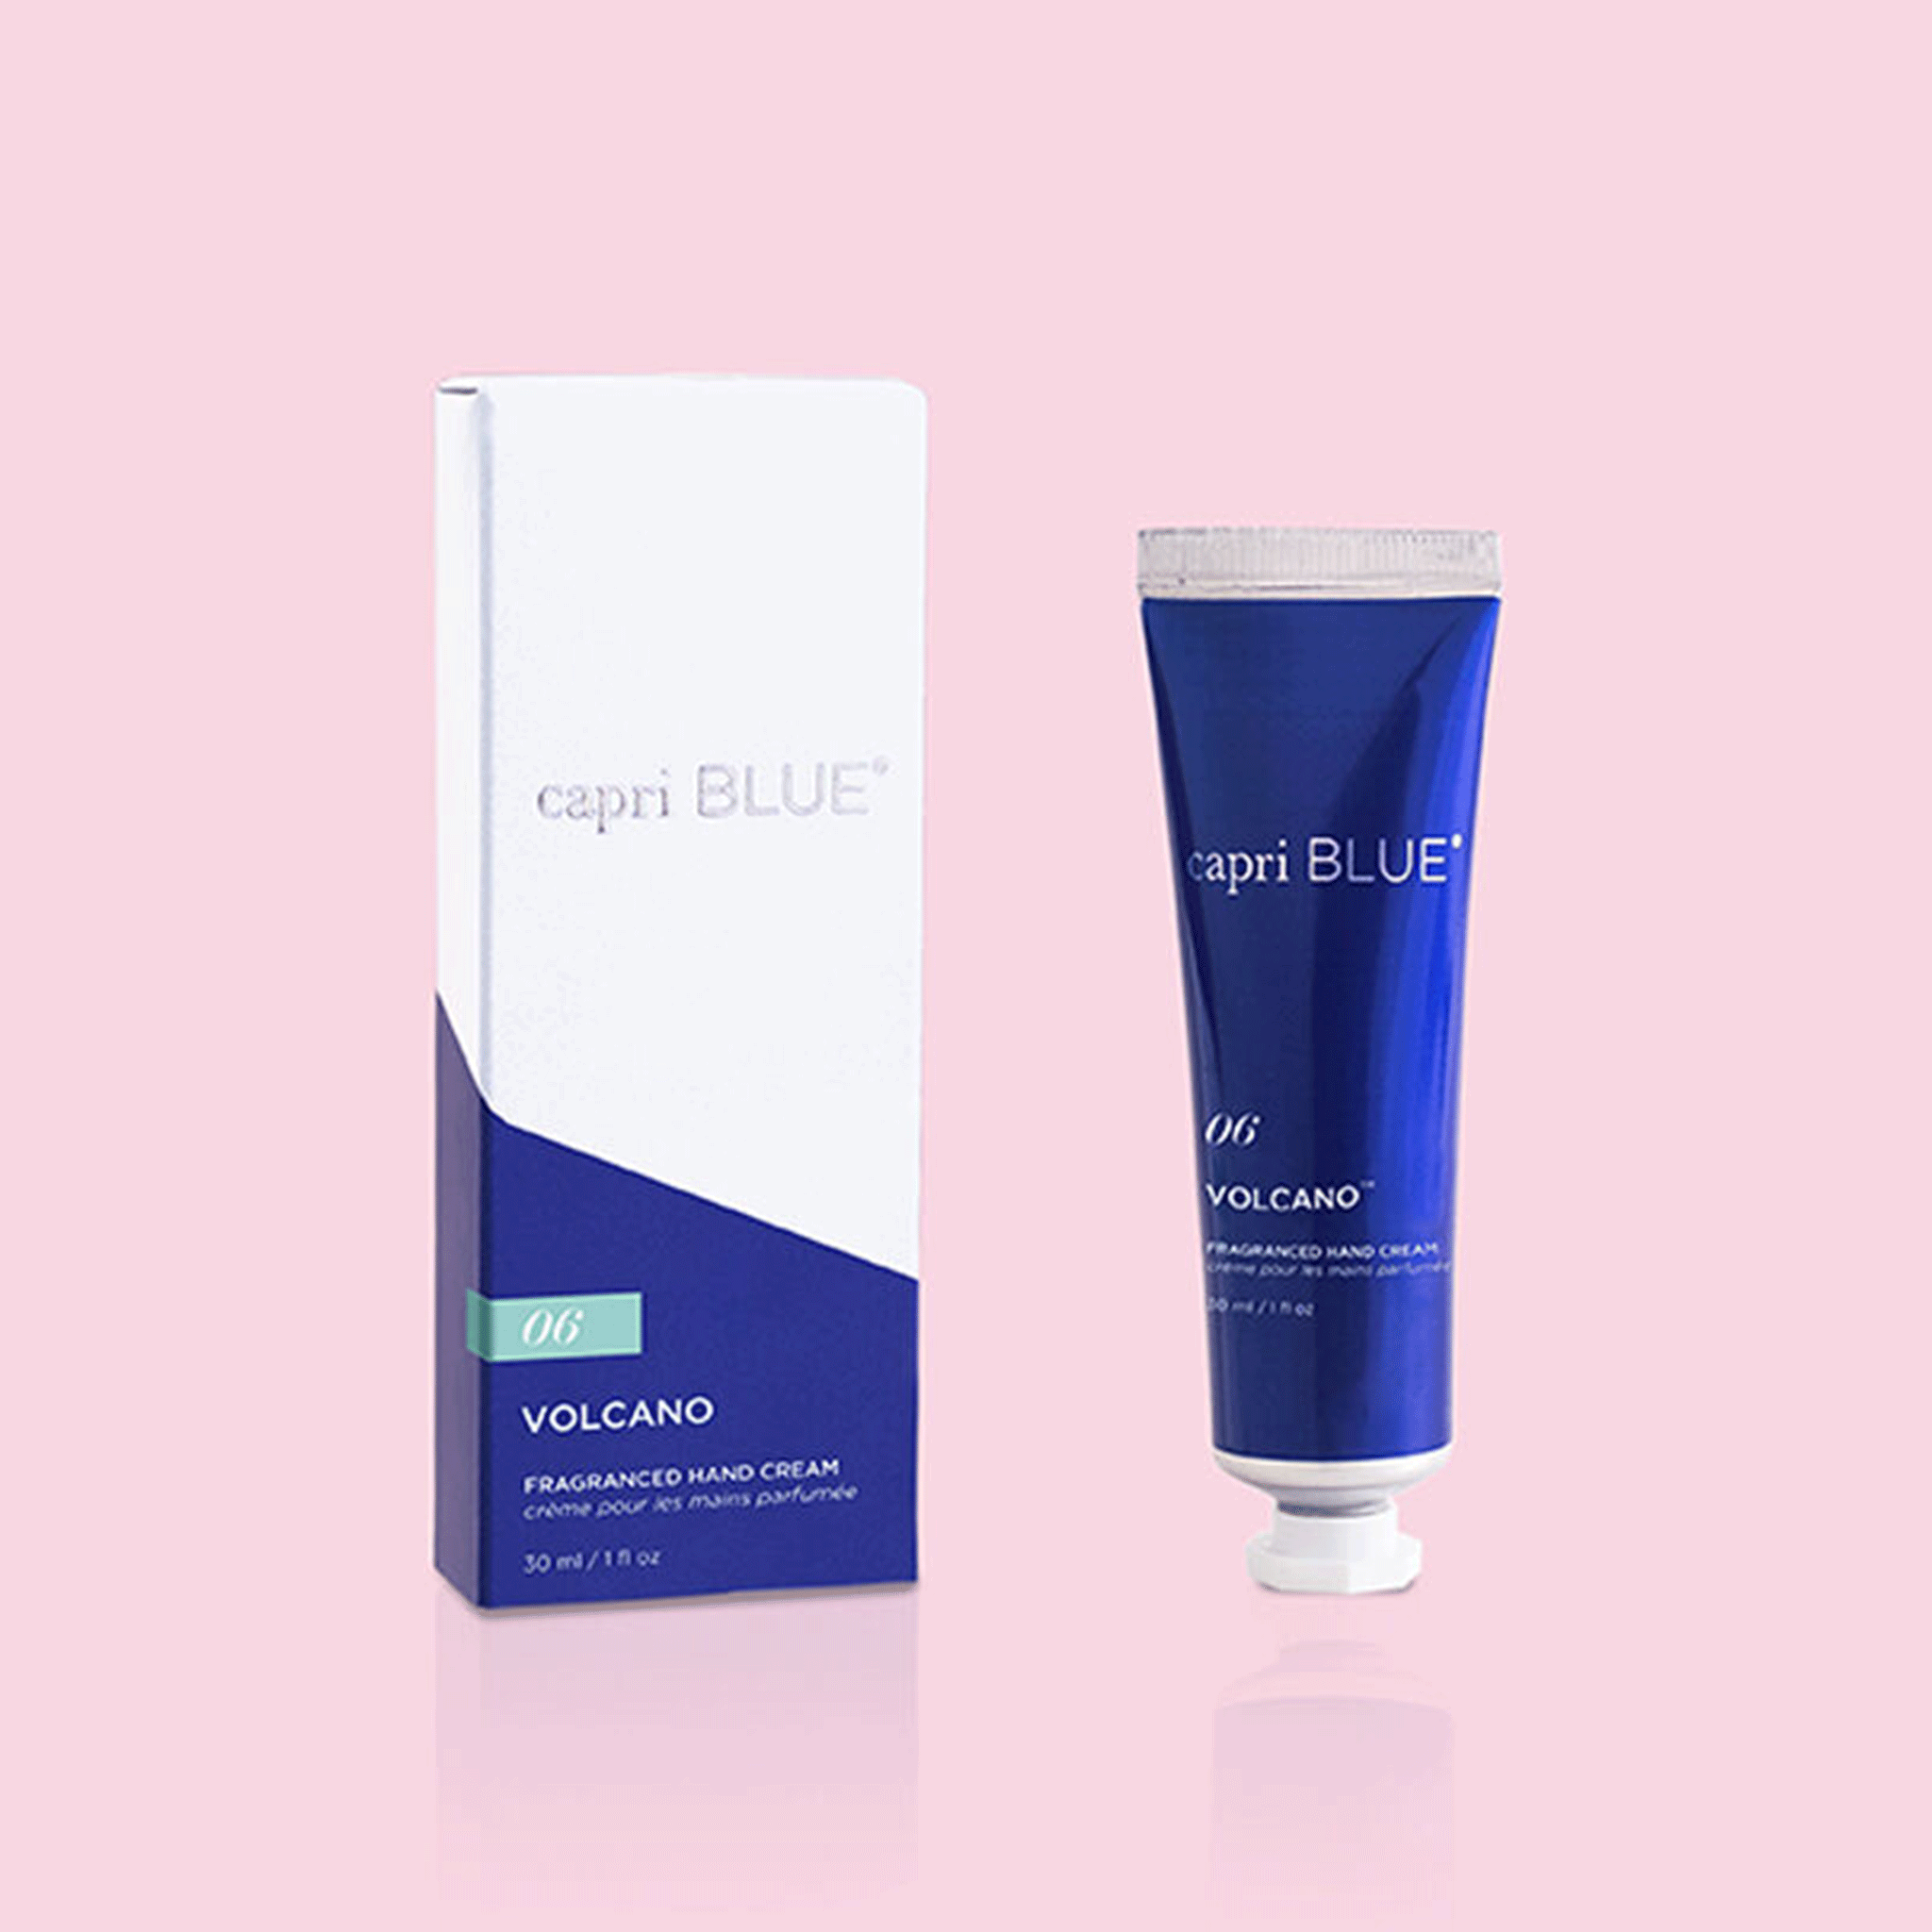 On a pink background is a blue bottle of hand cream with silver text that reads, &quot;capri BLUE 06 Volcano&quot;.